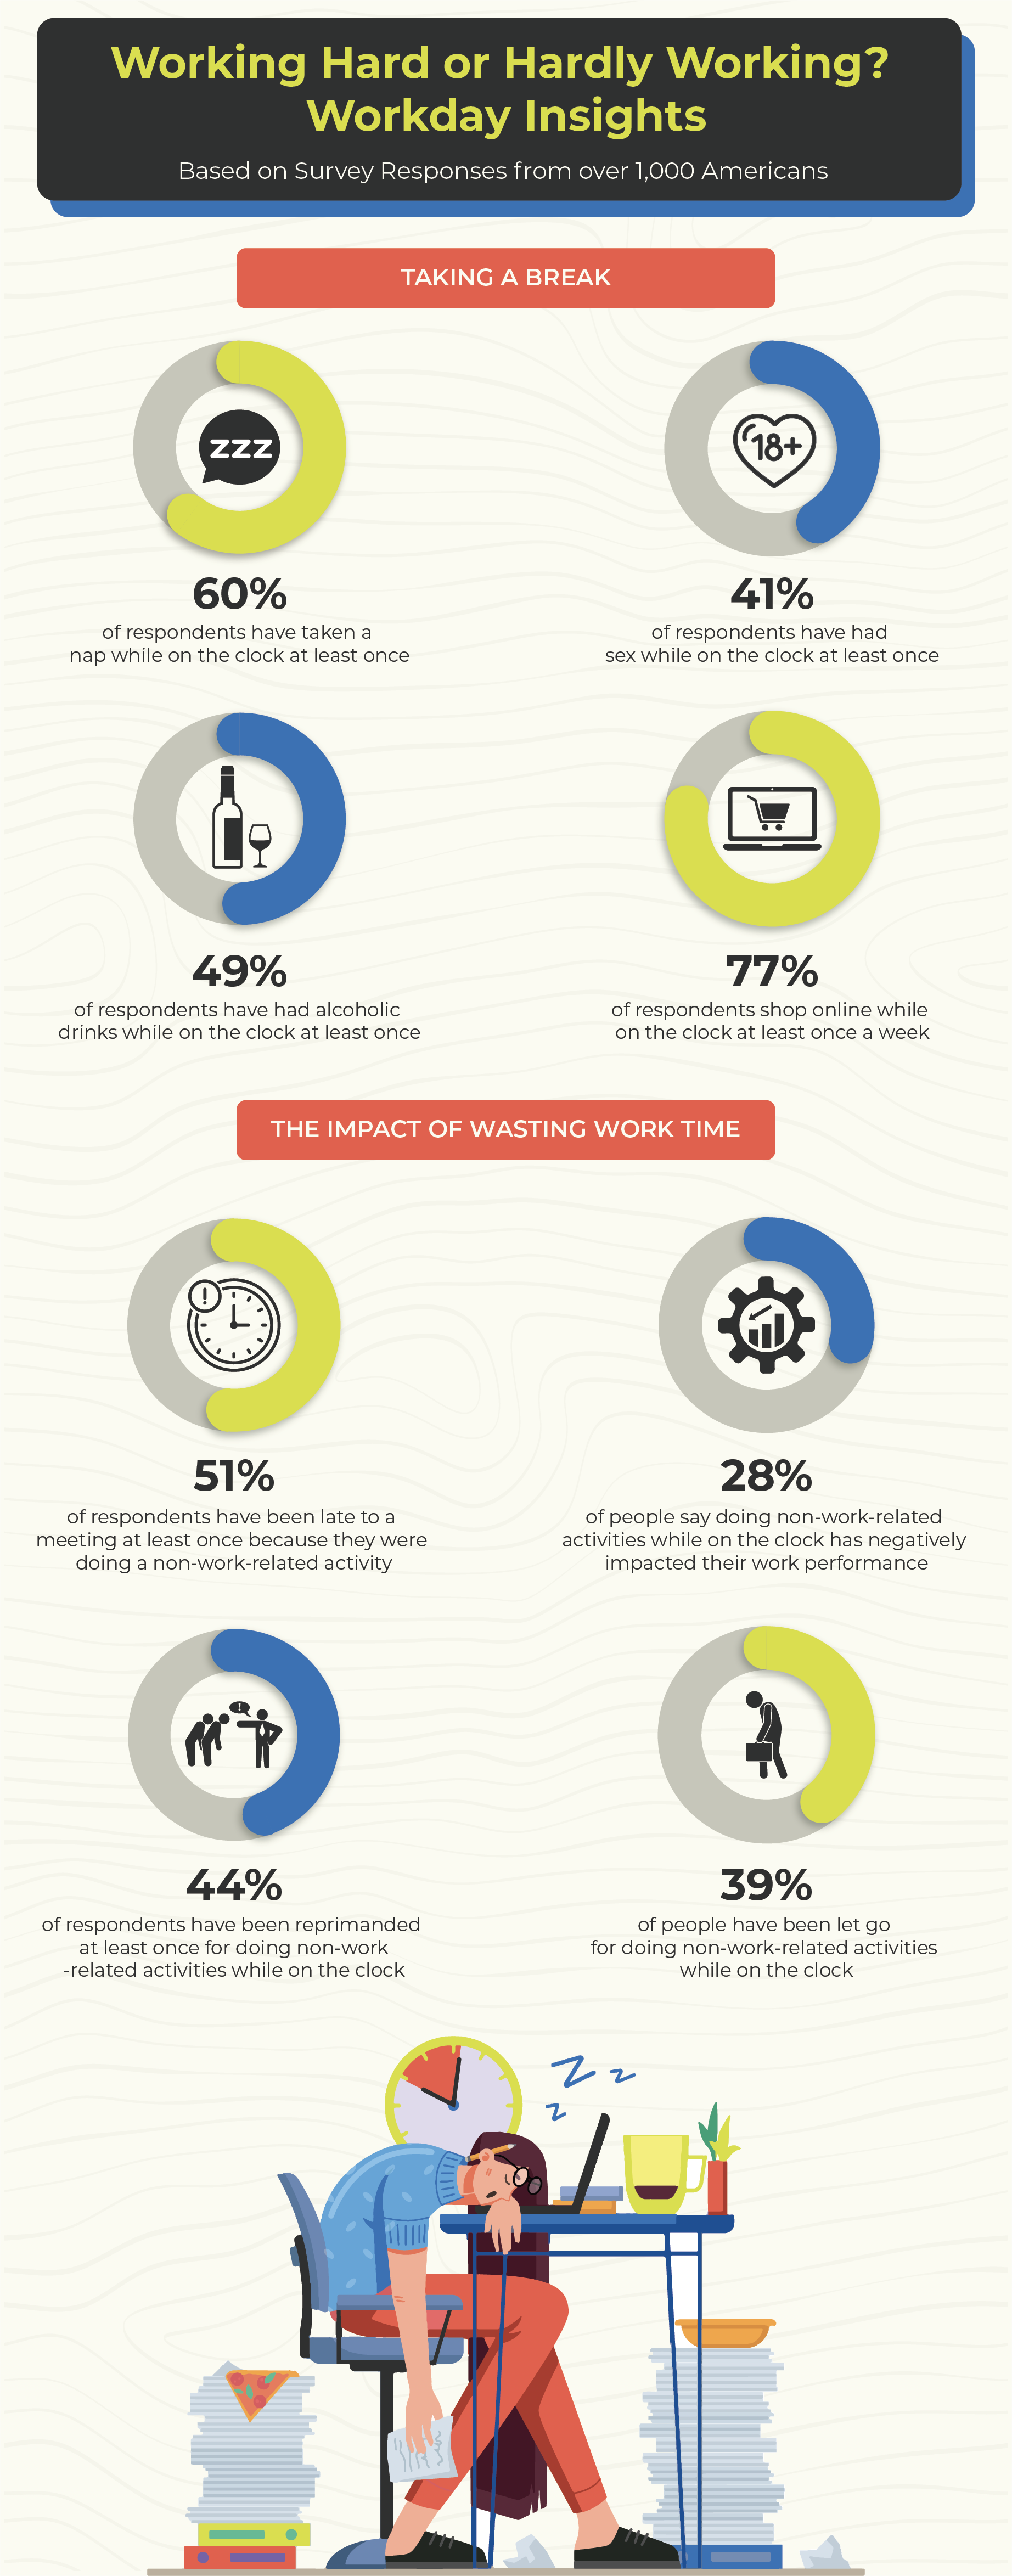 Working Hard or Hardly Working? Workday Insights